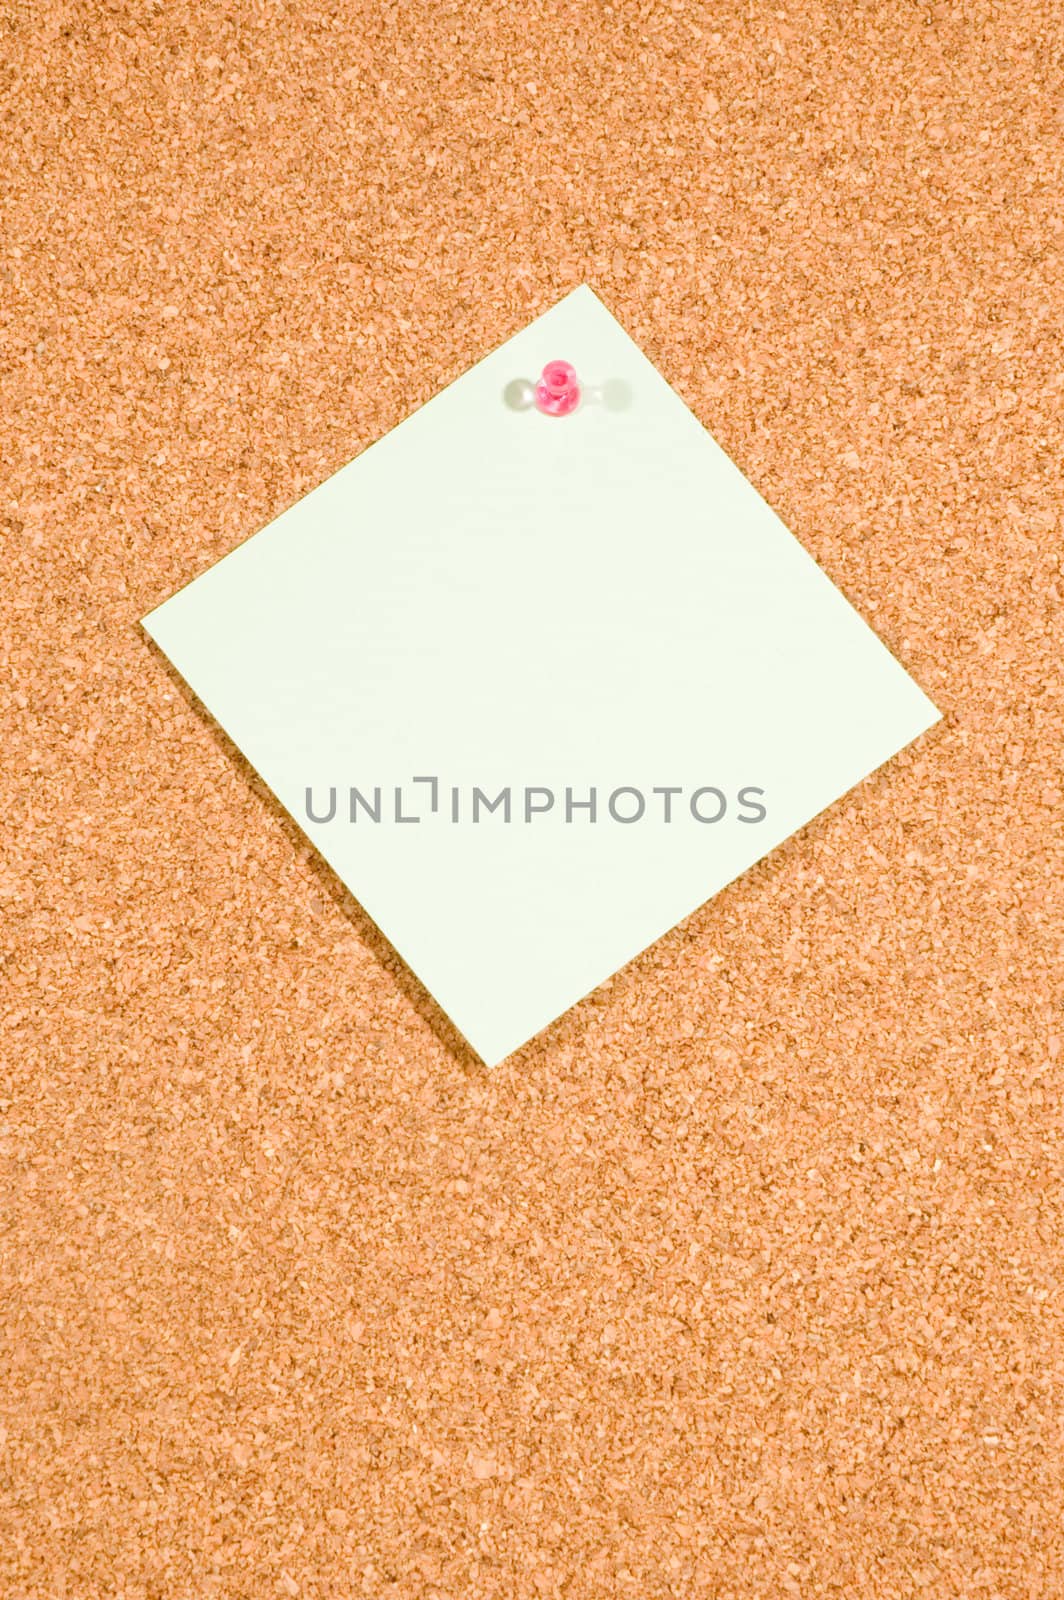 memo board with empty note  on white background by ladyminnie